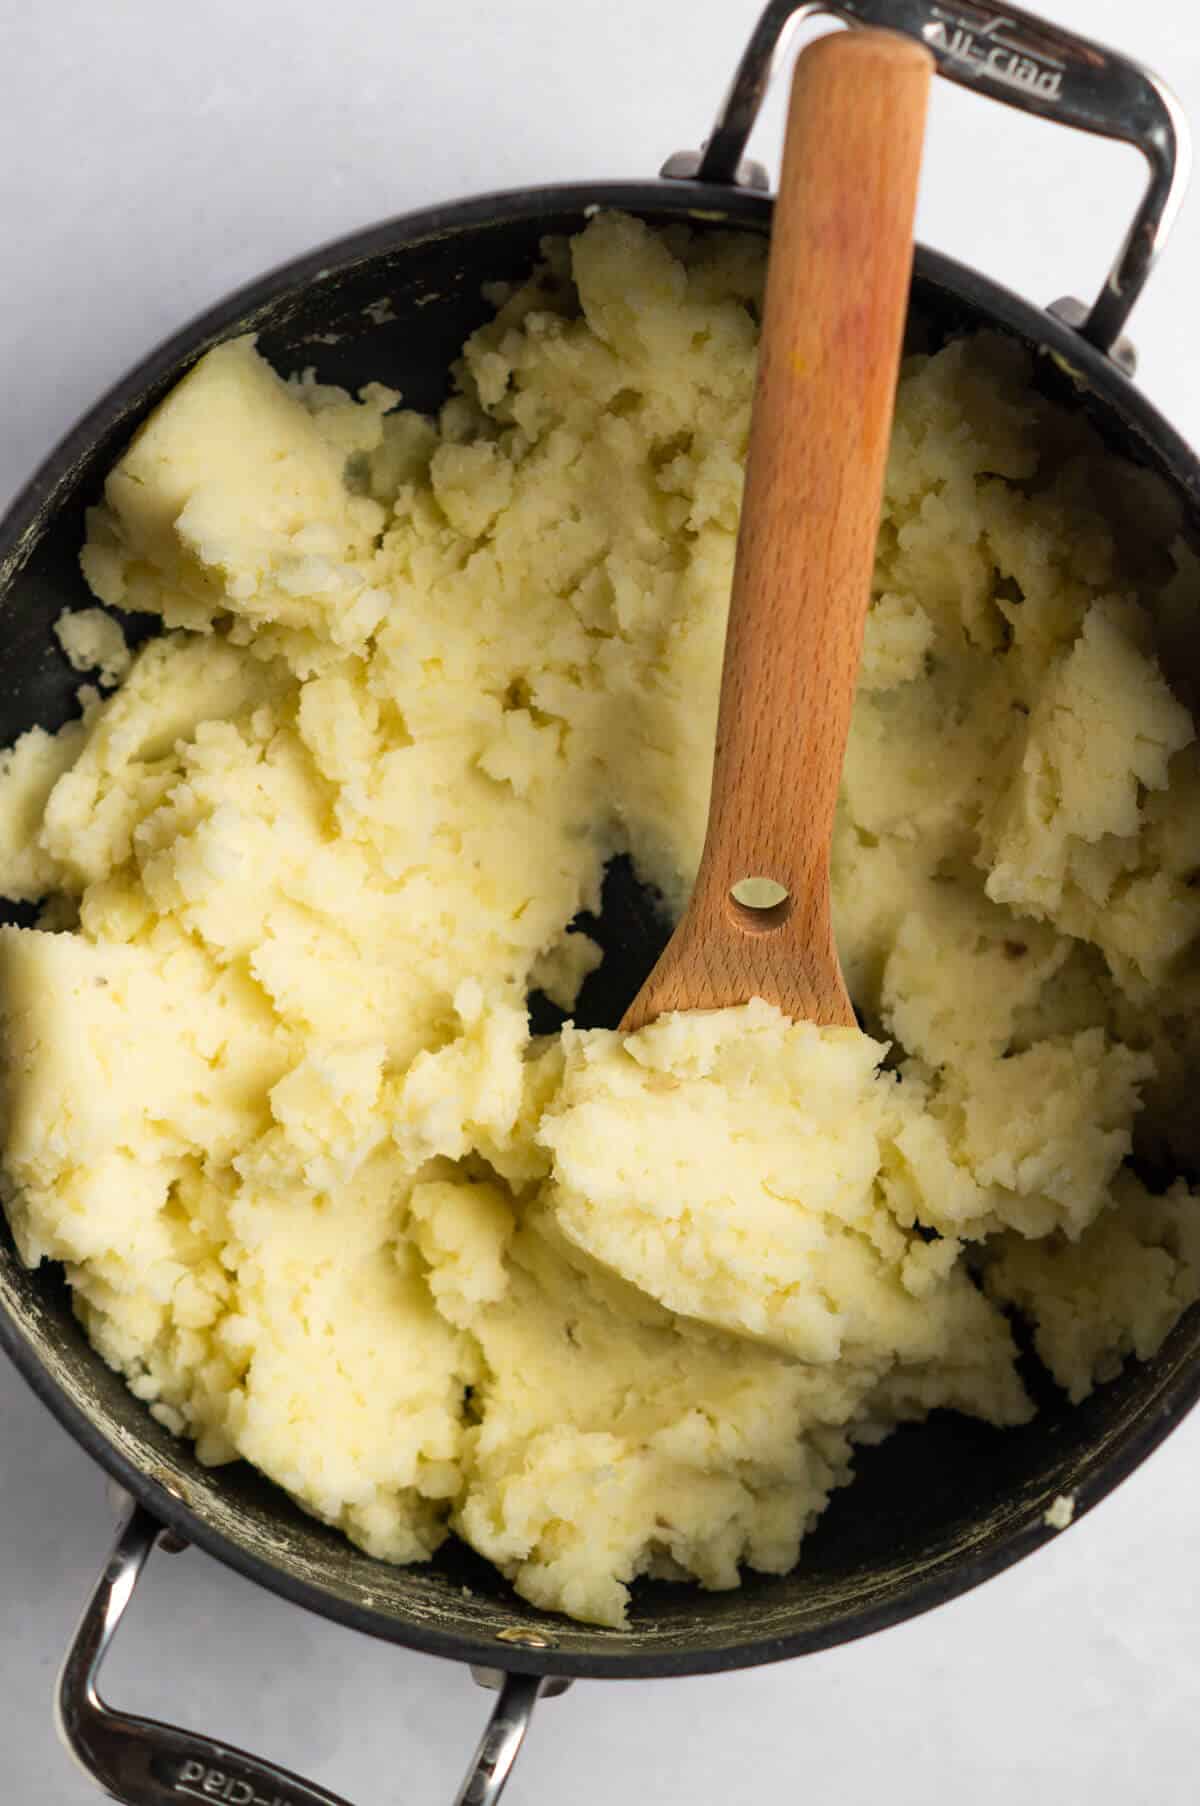 A large pot with mashed potatoes and a wooden spoon.